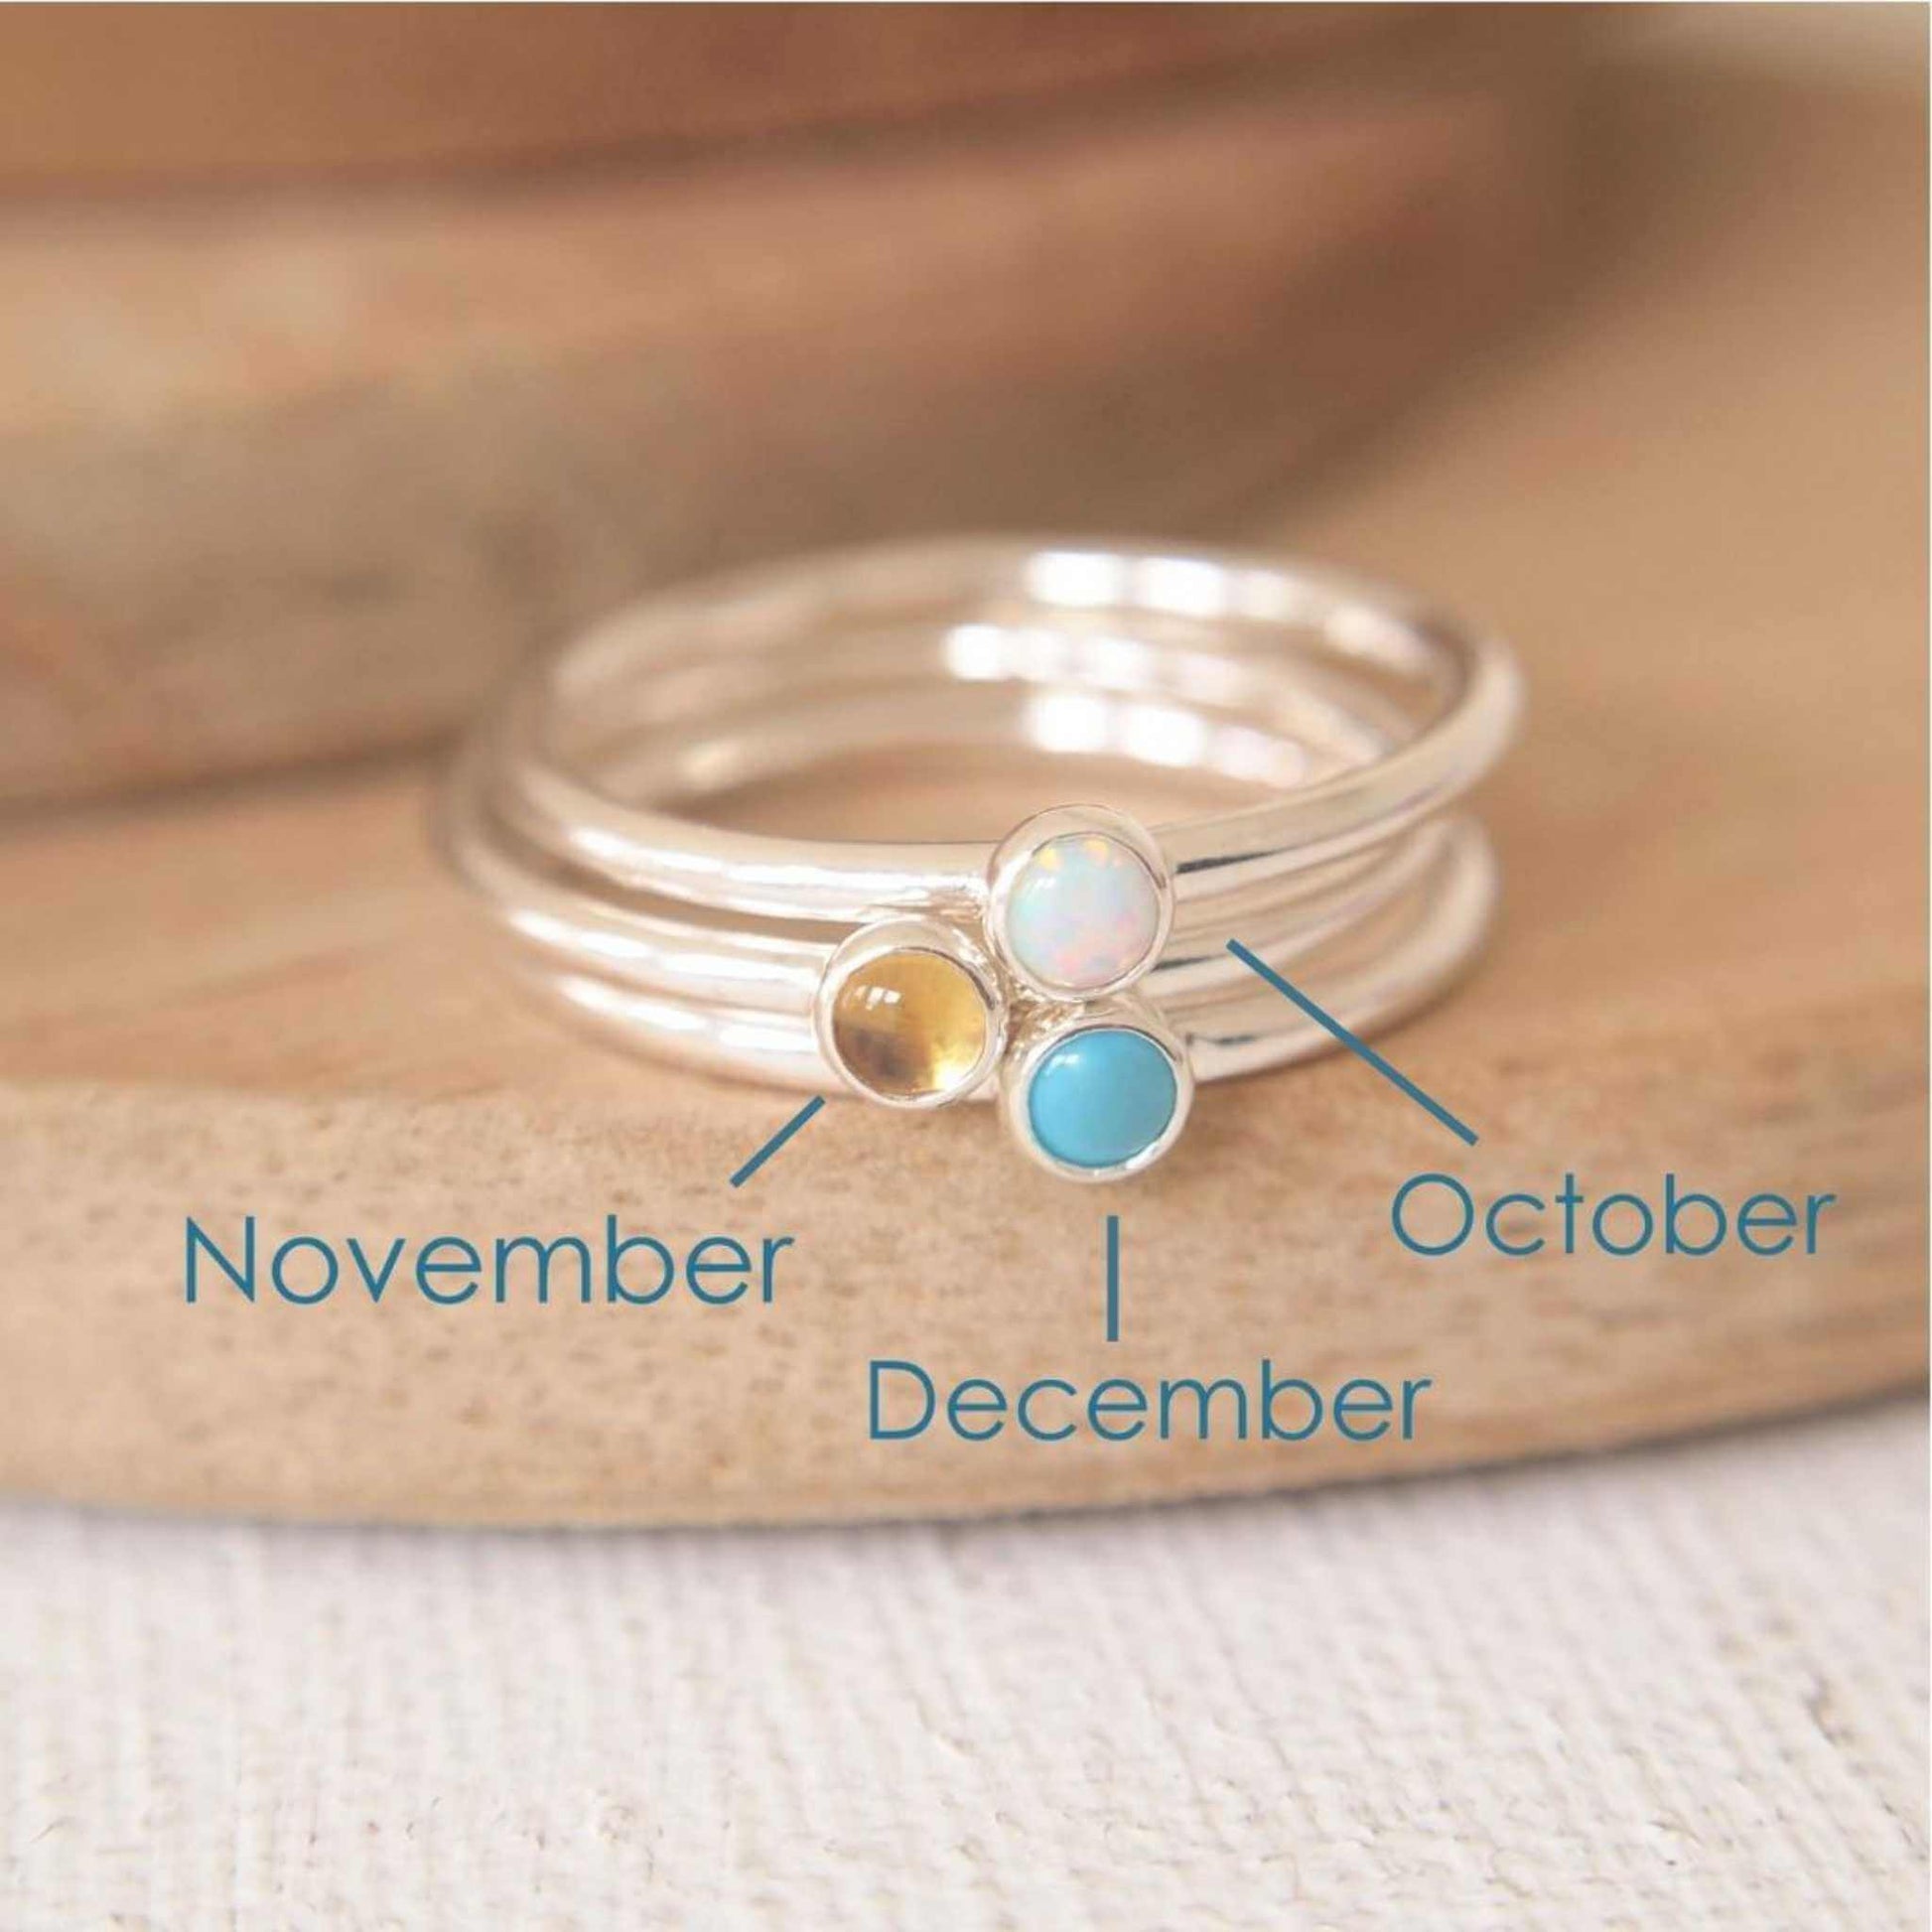 Three Silver rings, each set simply with a single gemstone in Lab Opal, Citrine and Turquoise in a round 3mm size. Birthstones for October, November and December. Handmade in Scotland by Maram Jewellery